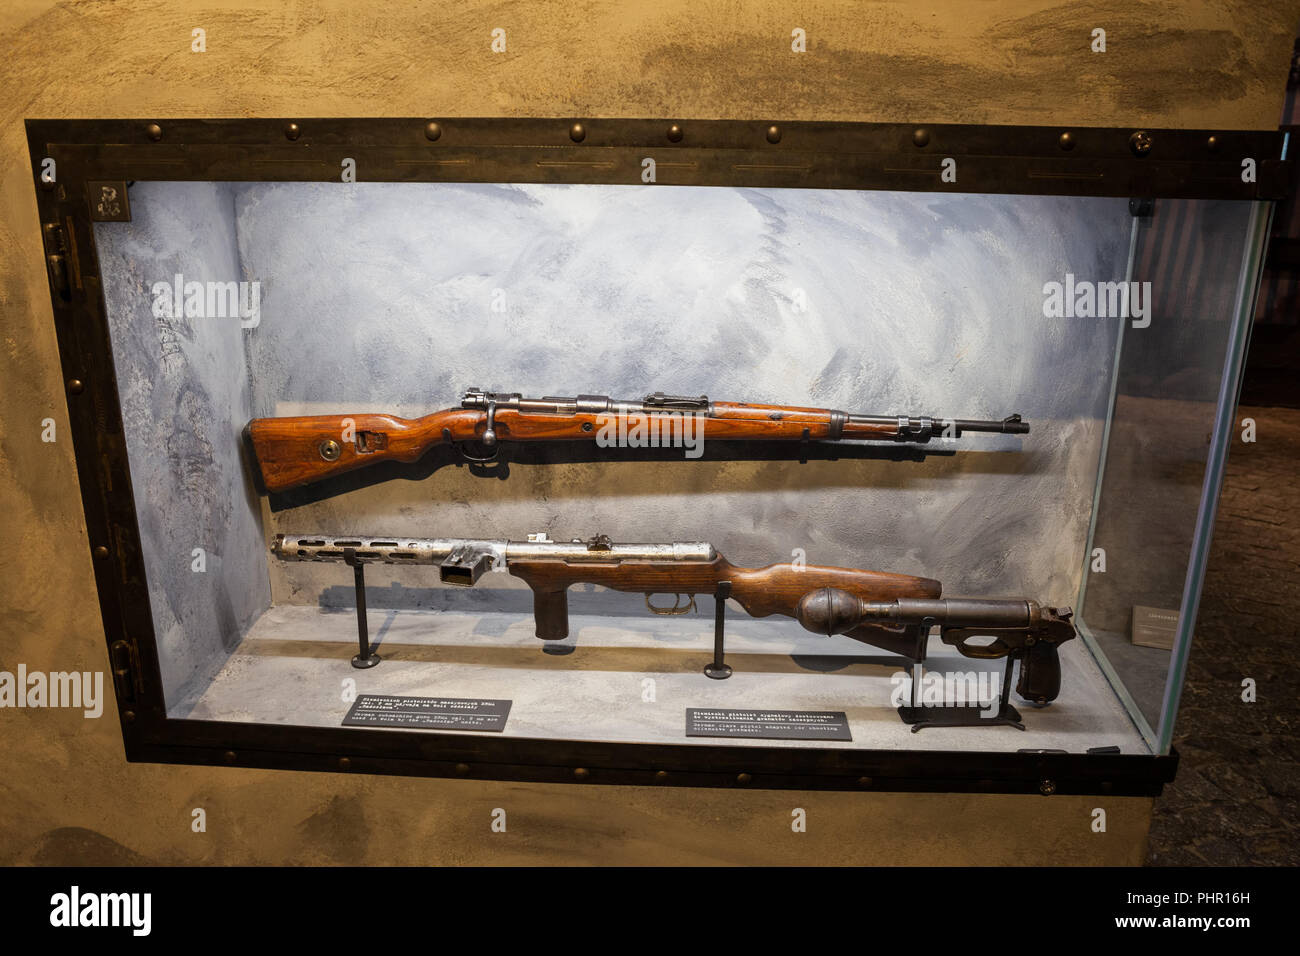 German submachine guns ERMA 9mm and flare pistol adopted to shoot grenades in Warsaw Rising Museum in Warsaw, Poland Stock Photo